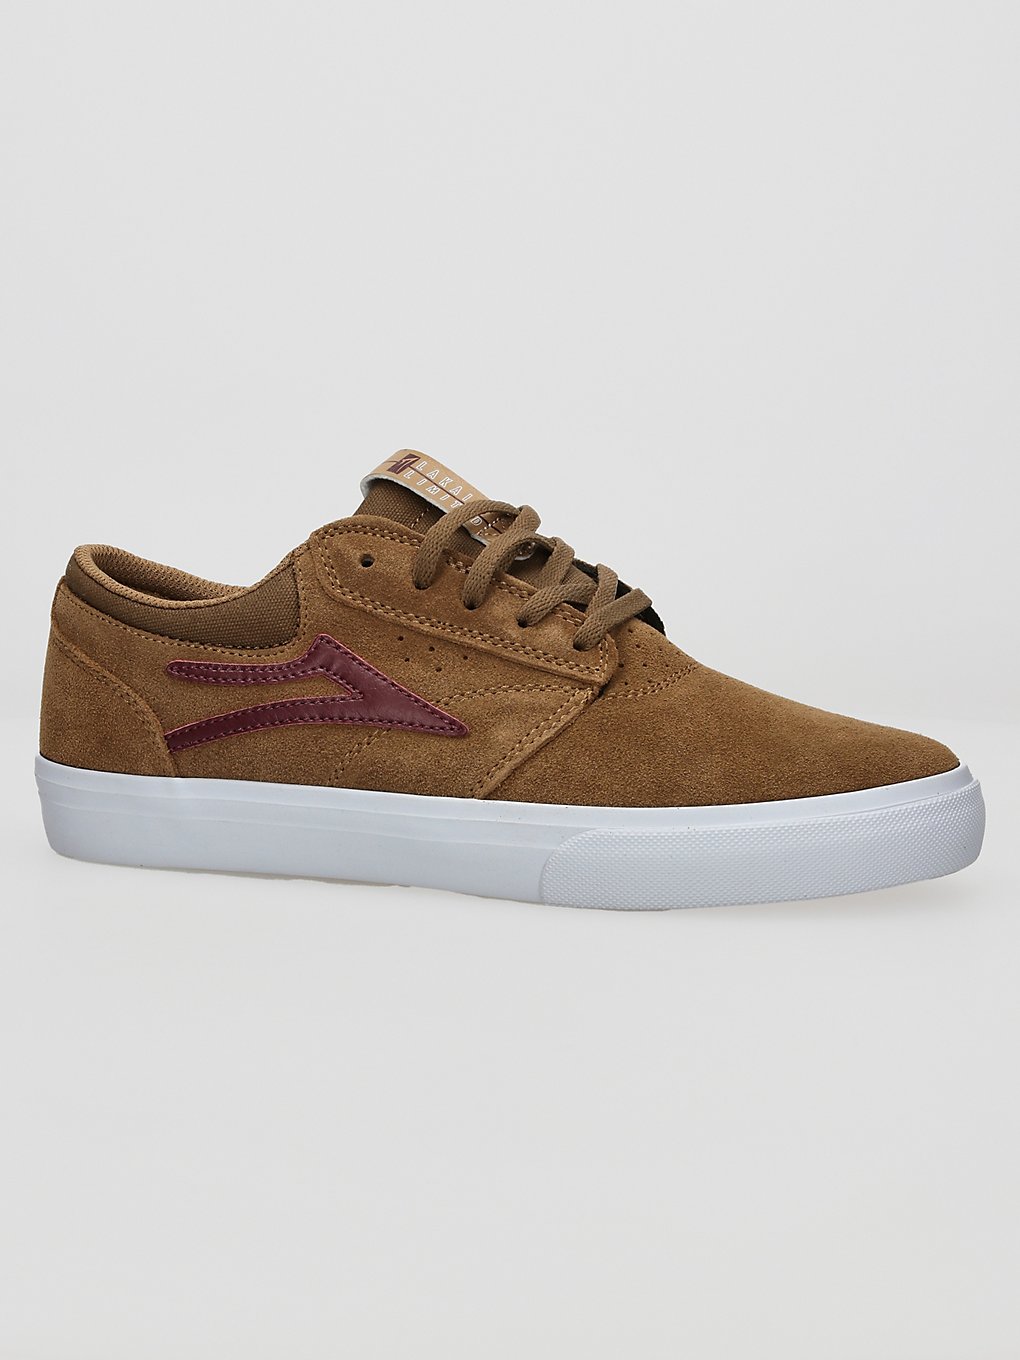 Lakai Griffin Skate Shoes tobacco suede